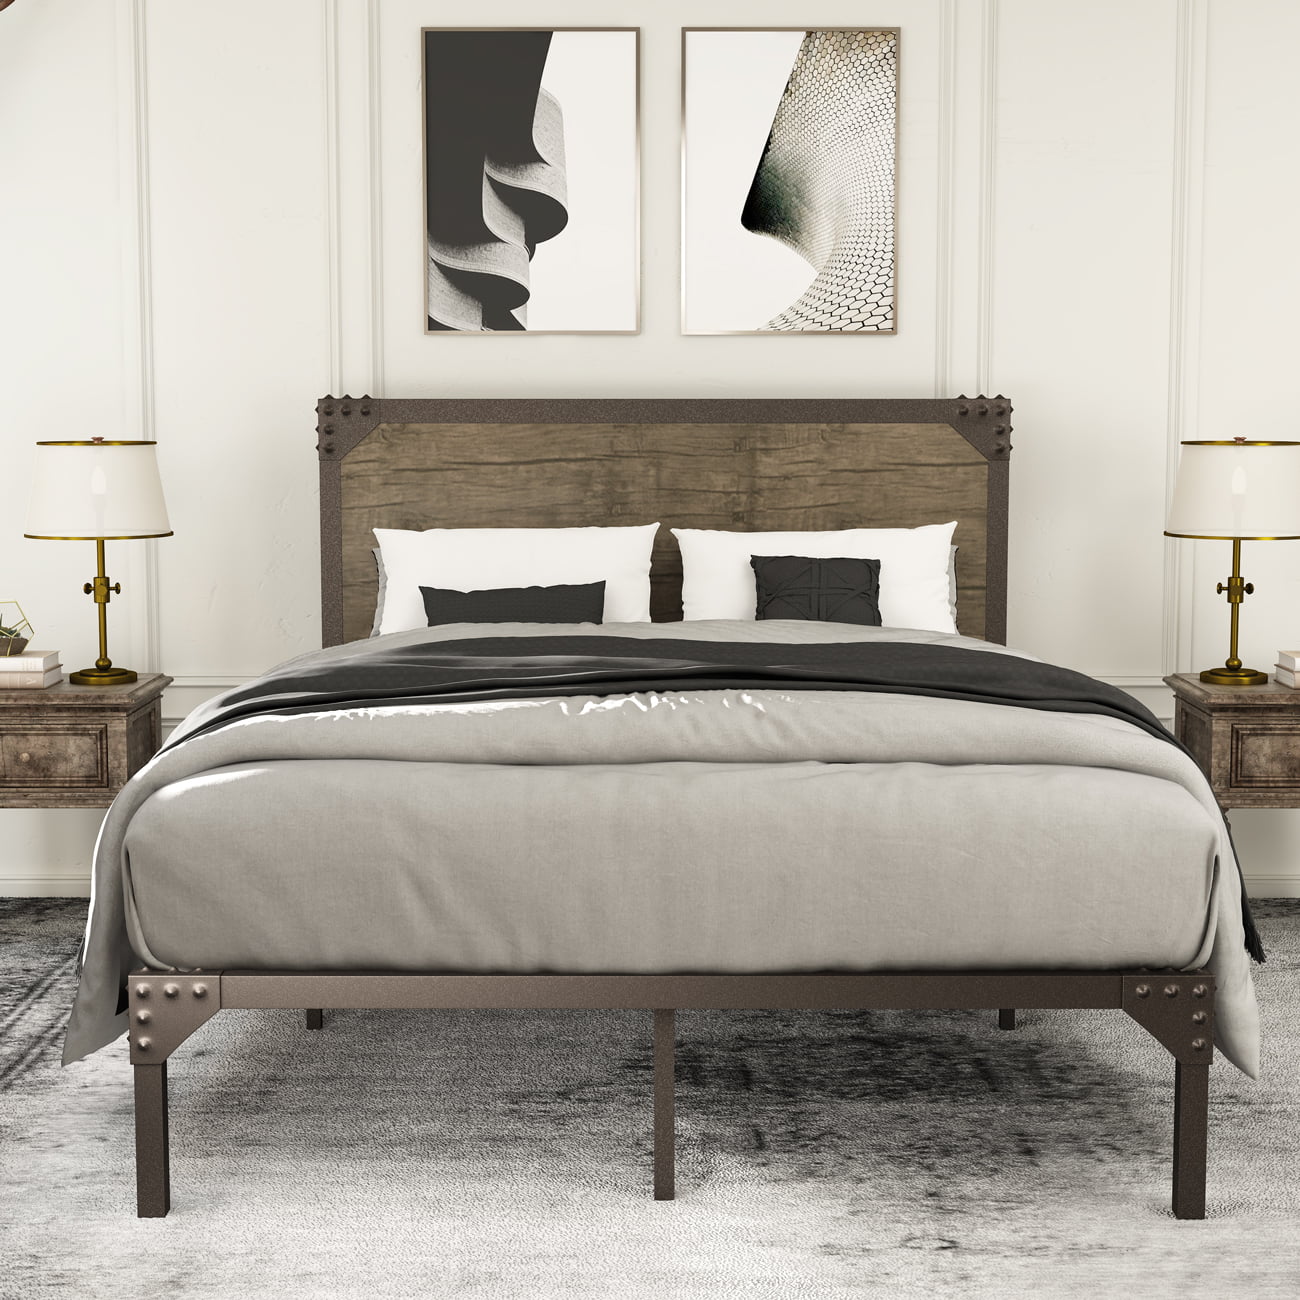 Amolife Full Size Bed Frame With, How To Build A Headboard For Full Size Bed